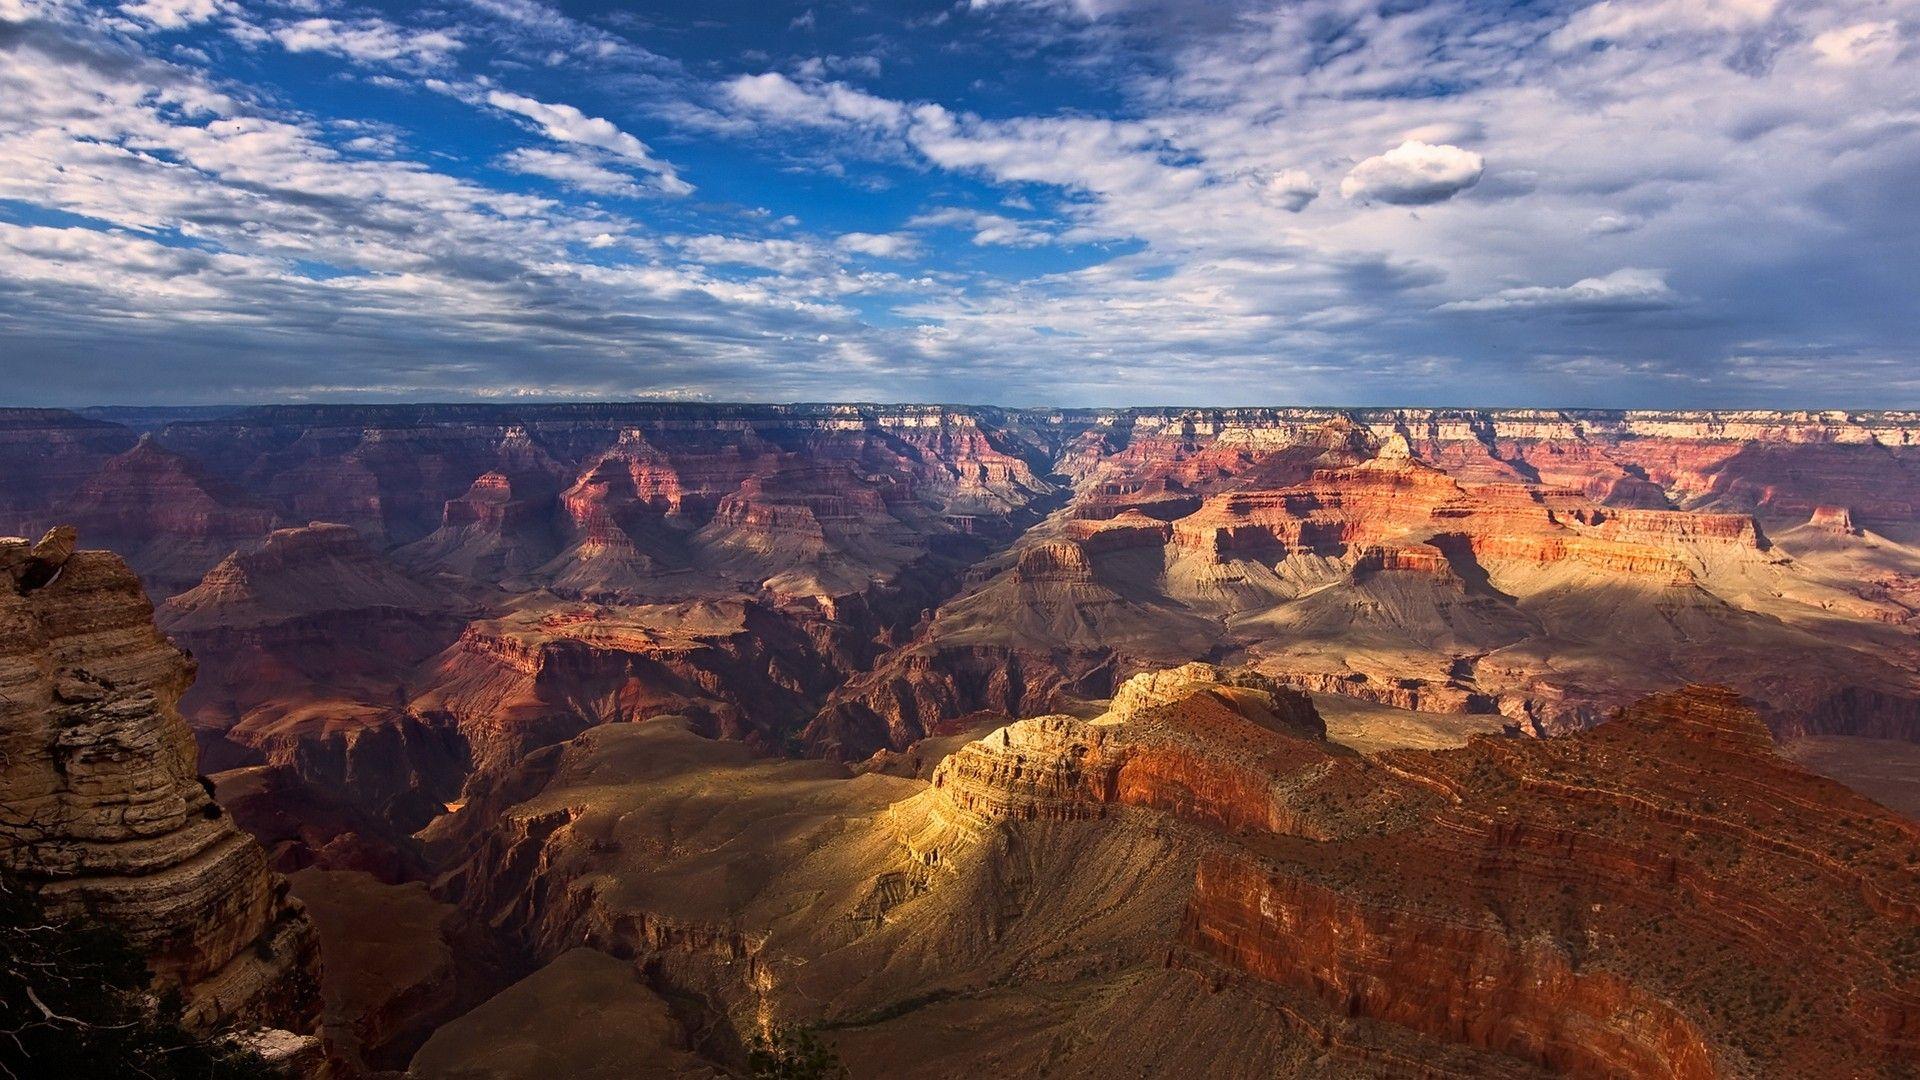 Gallery For > Grand Canyon National Park Wallpaper